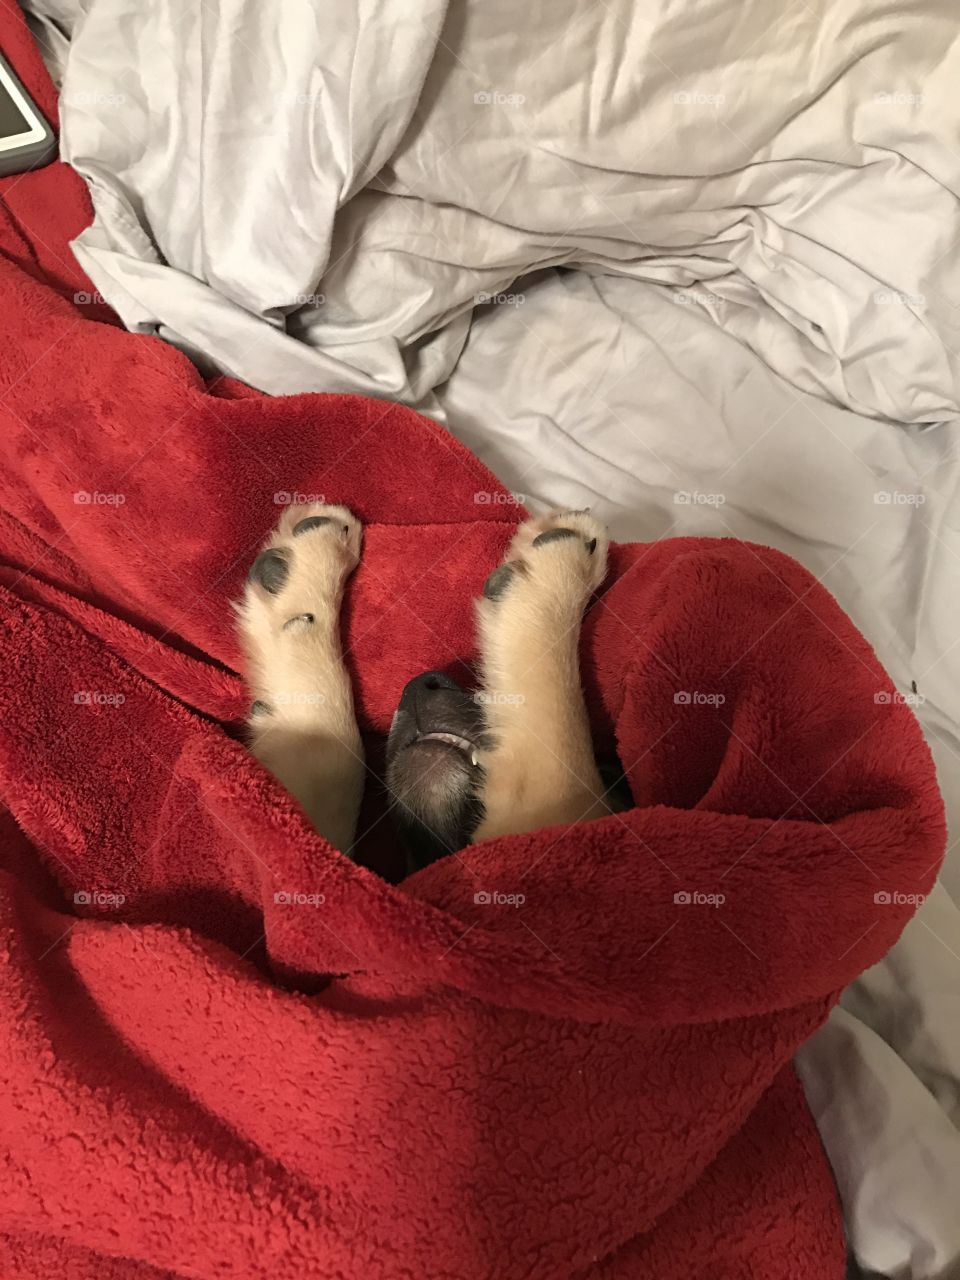 Passed out in his comfy blanket